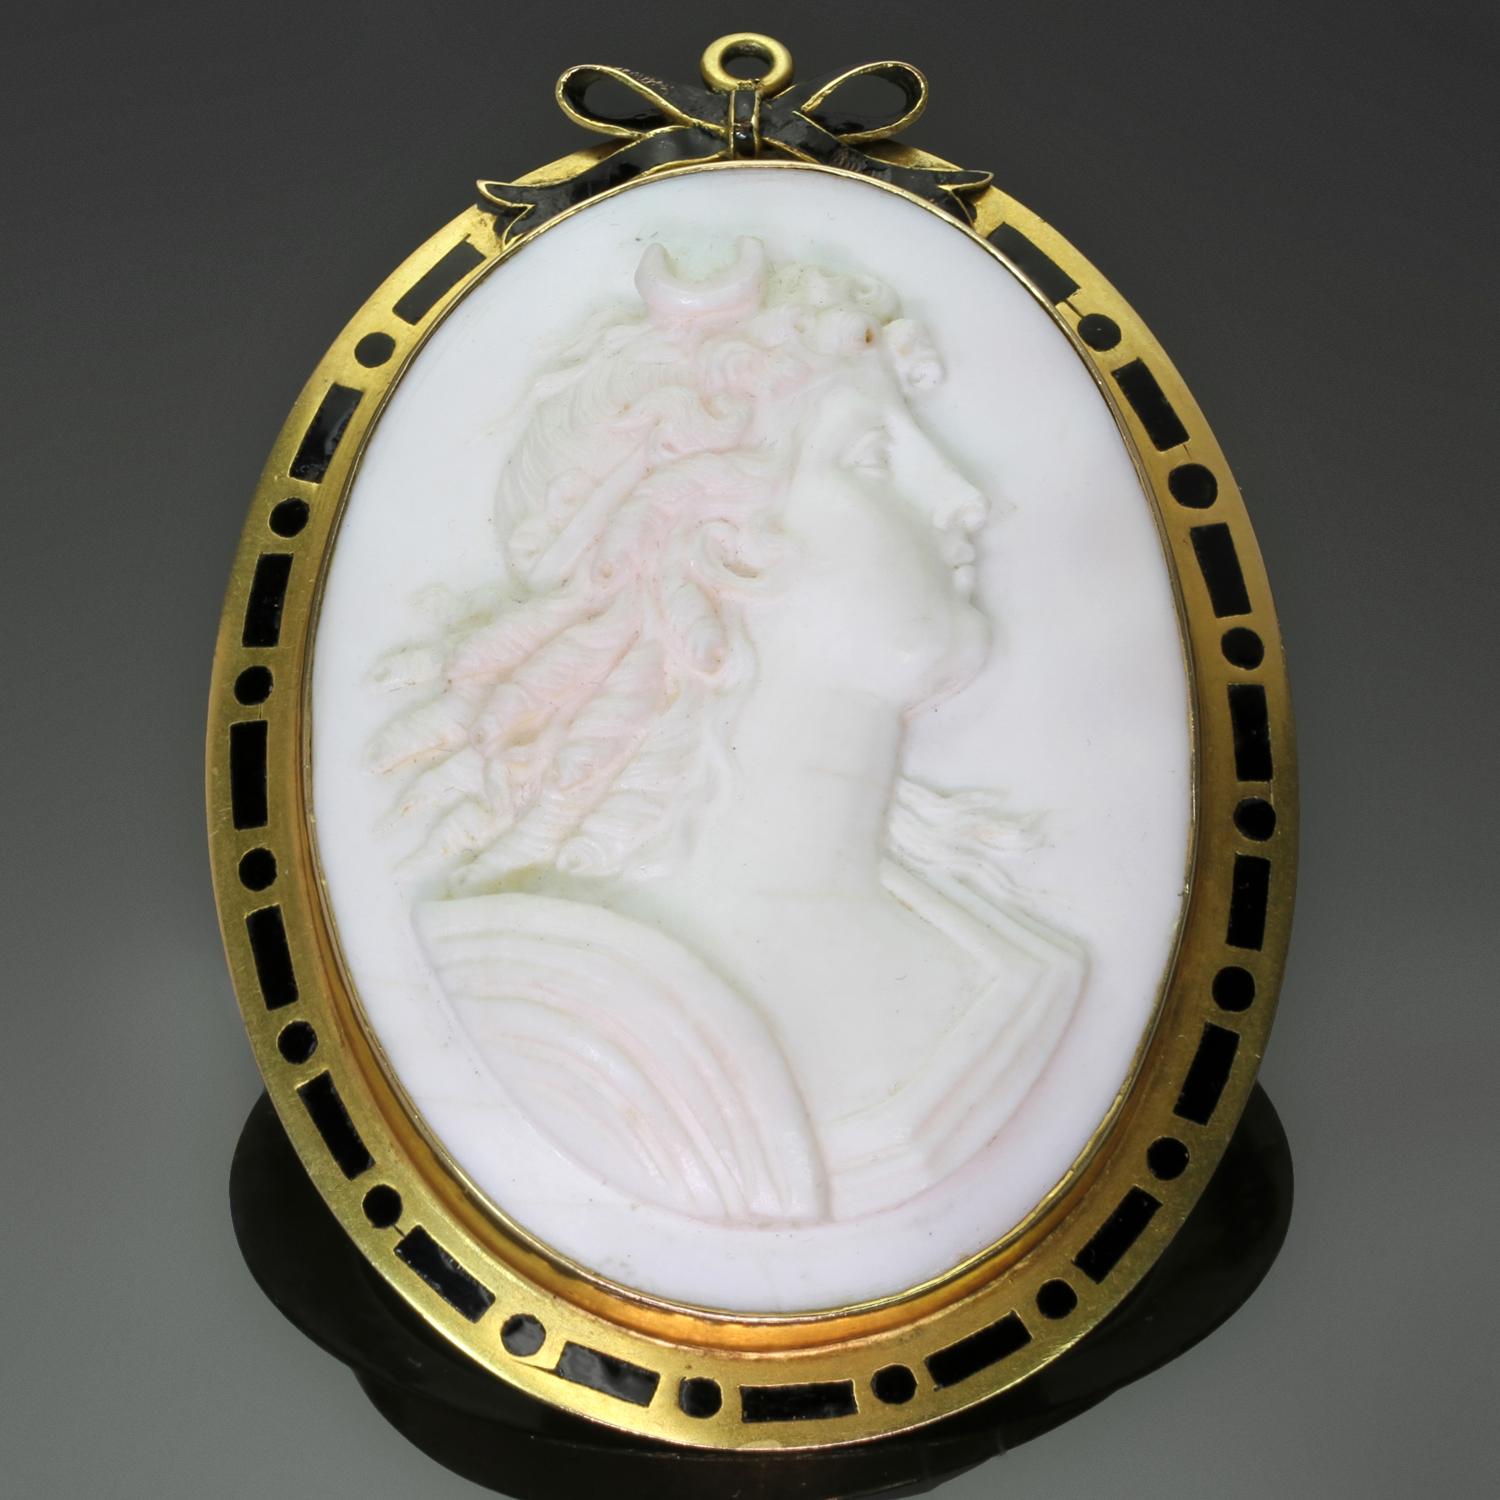 A rare hand-carved natural angel skin coral cameo brooch that can also be worn as a pendant. Framed by 14k yellow gold with black enamel designs. The carving details and the pale pink to white colors of the cameo make this pin a truly stunning